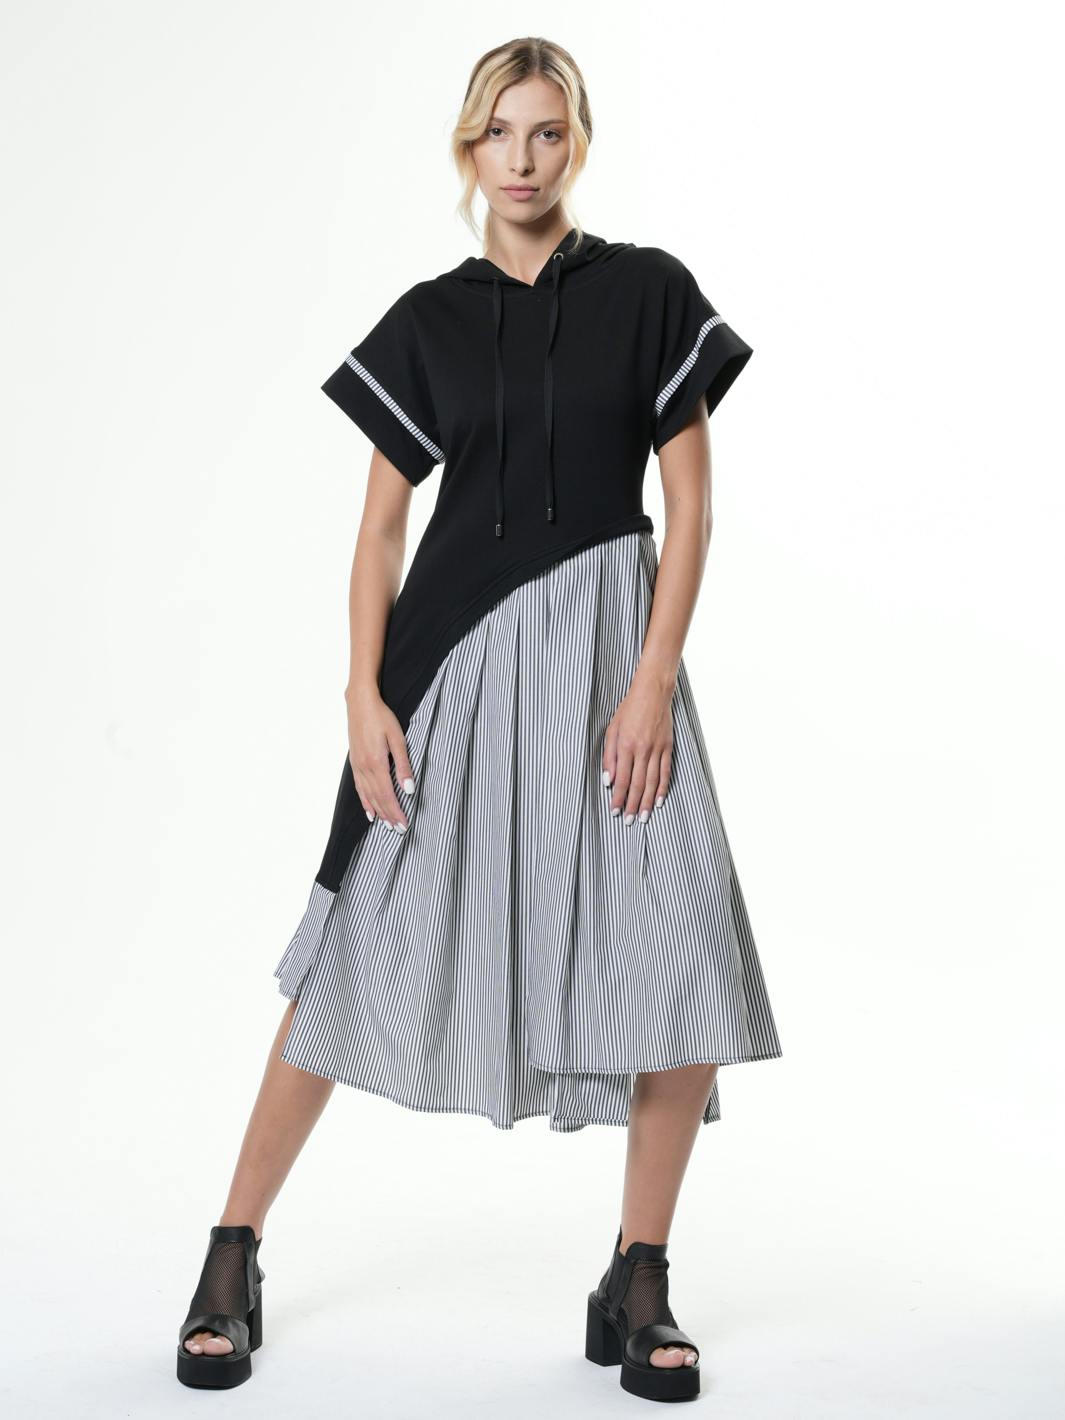 Thumbnail preview #0 for Asymmetric Hooded Dress With Short Sleeves 